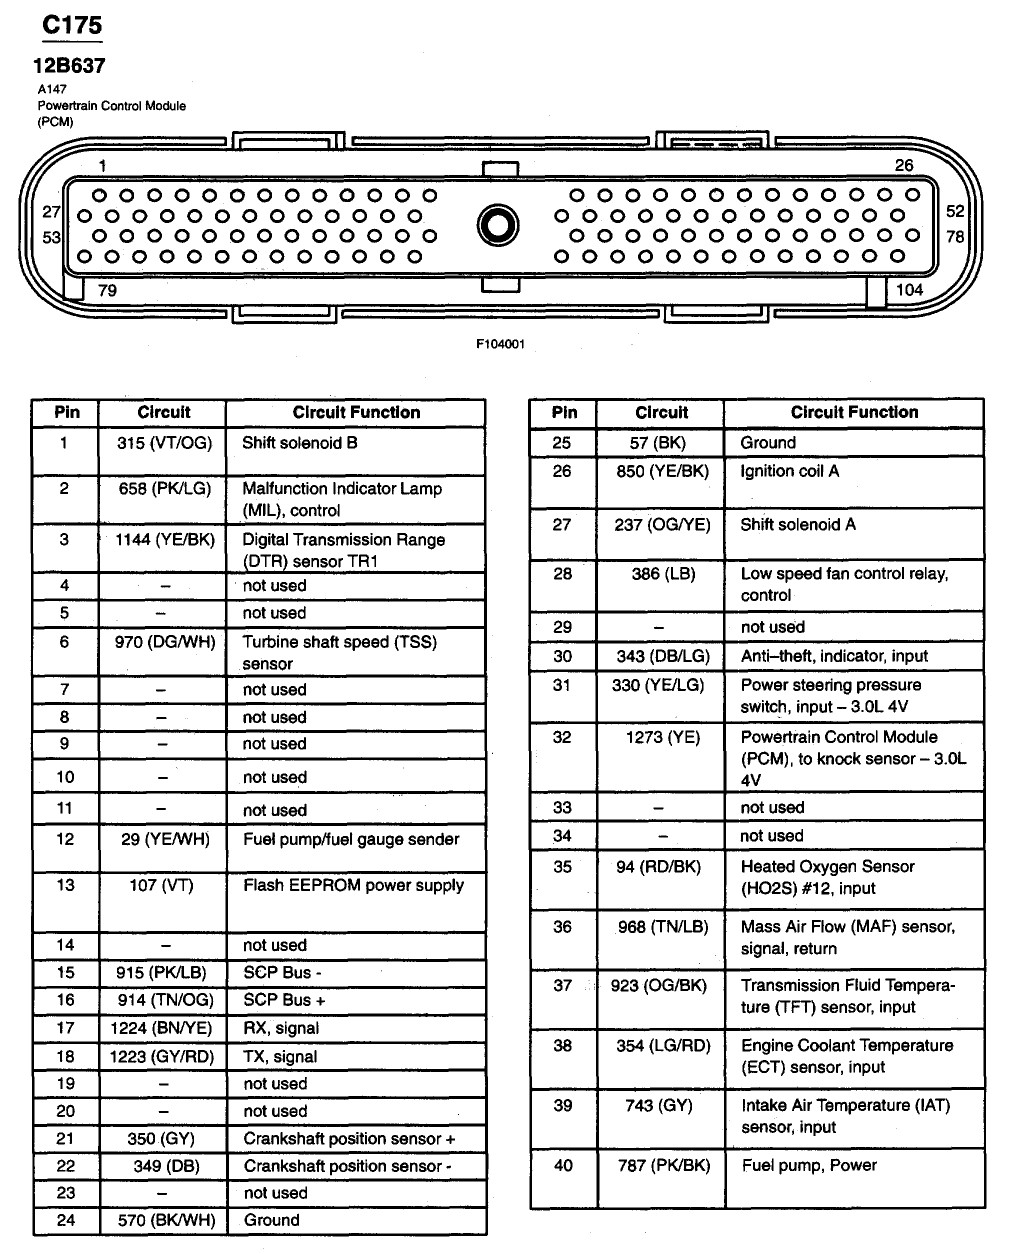 2001 ford Pcm 4.2 Gas Wiring Diagram Taurus 2001 3l Ohv the Pcm Located Next to the Brake Pedal Has Six Electrical Connectors 2 Of 2001 ford Pcm 4.2 Gas Wiring Diagram